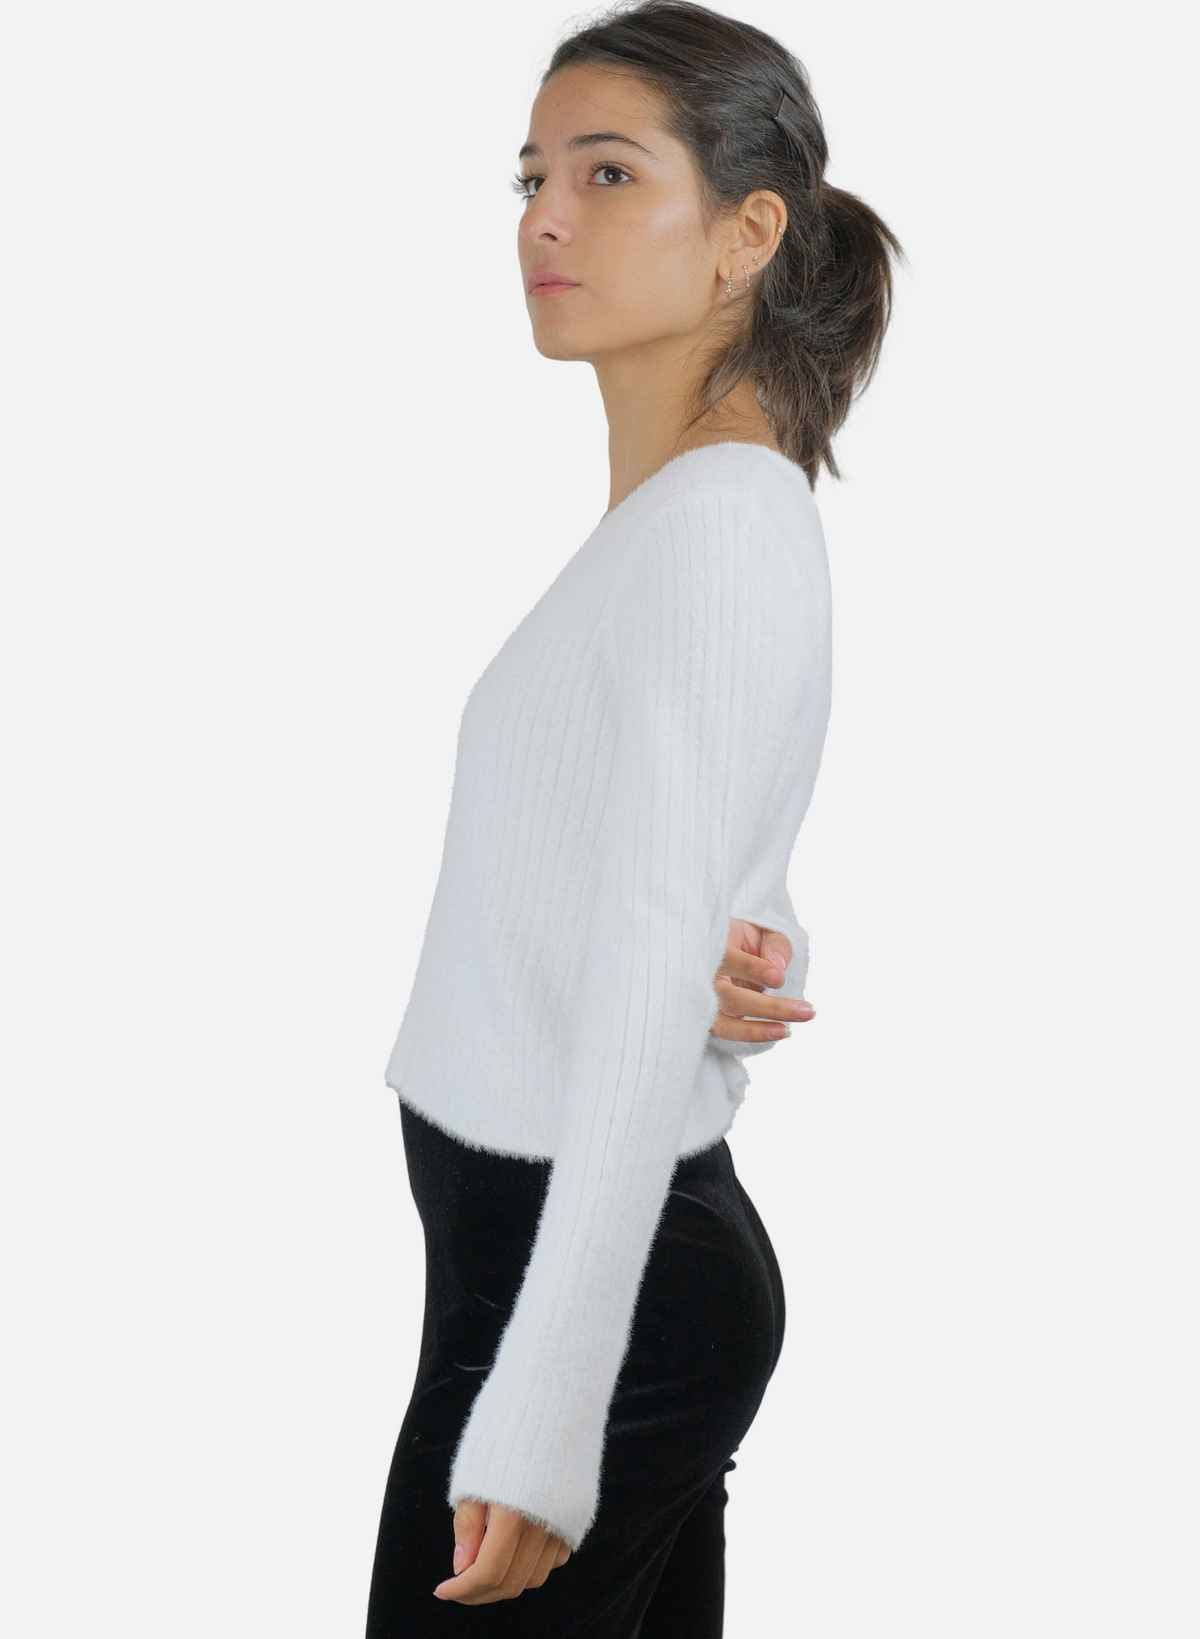 Women's sweater with a ribbed effect ribs